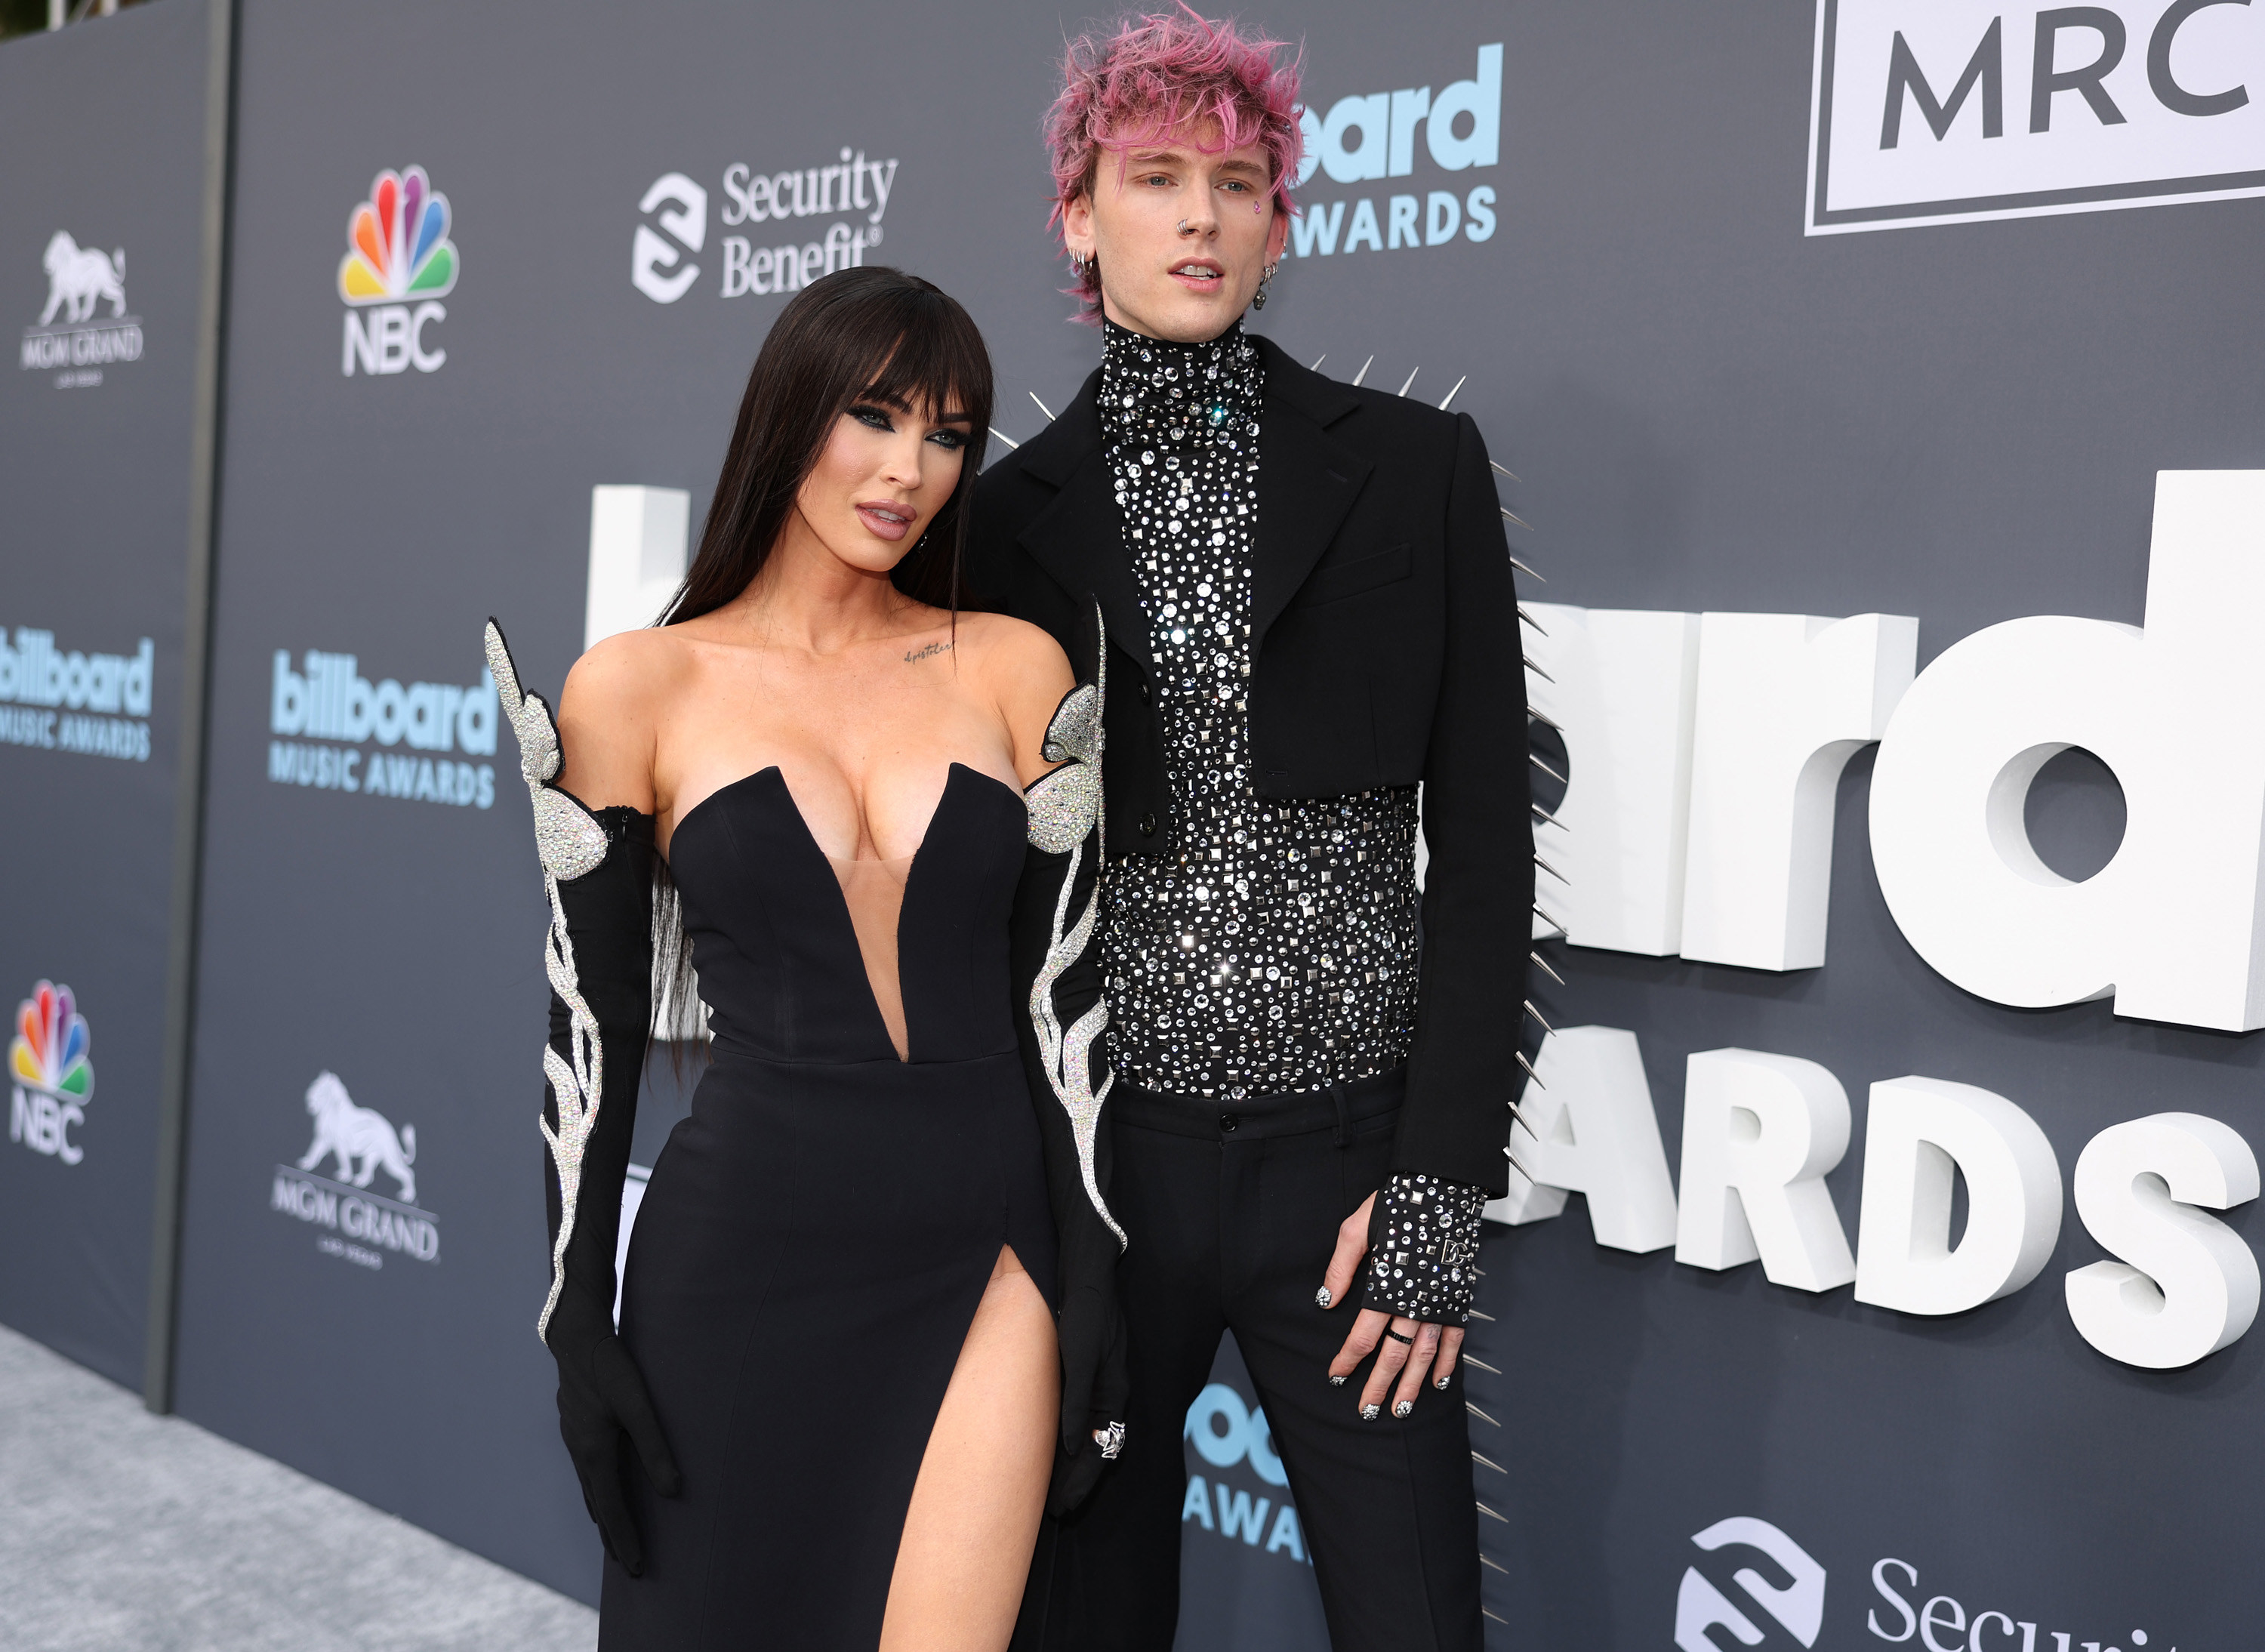 Megan and MGK on the Billboard Music Awards red carpet